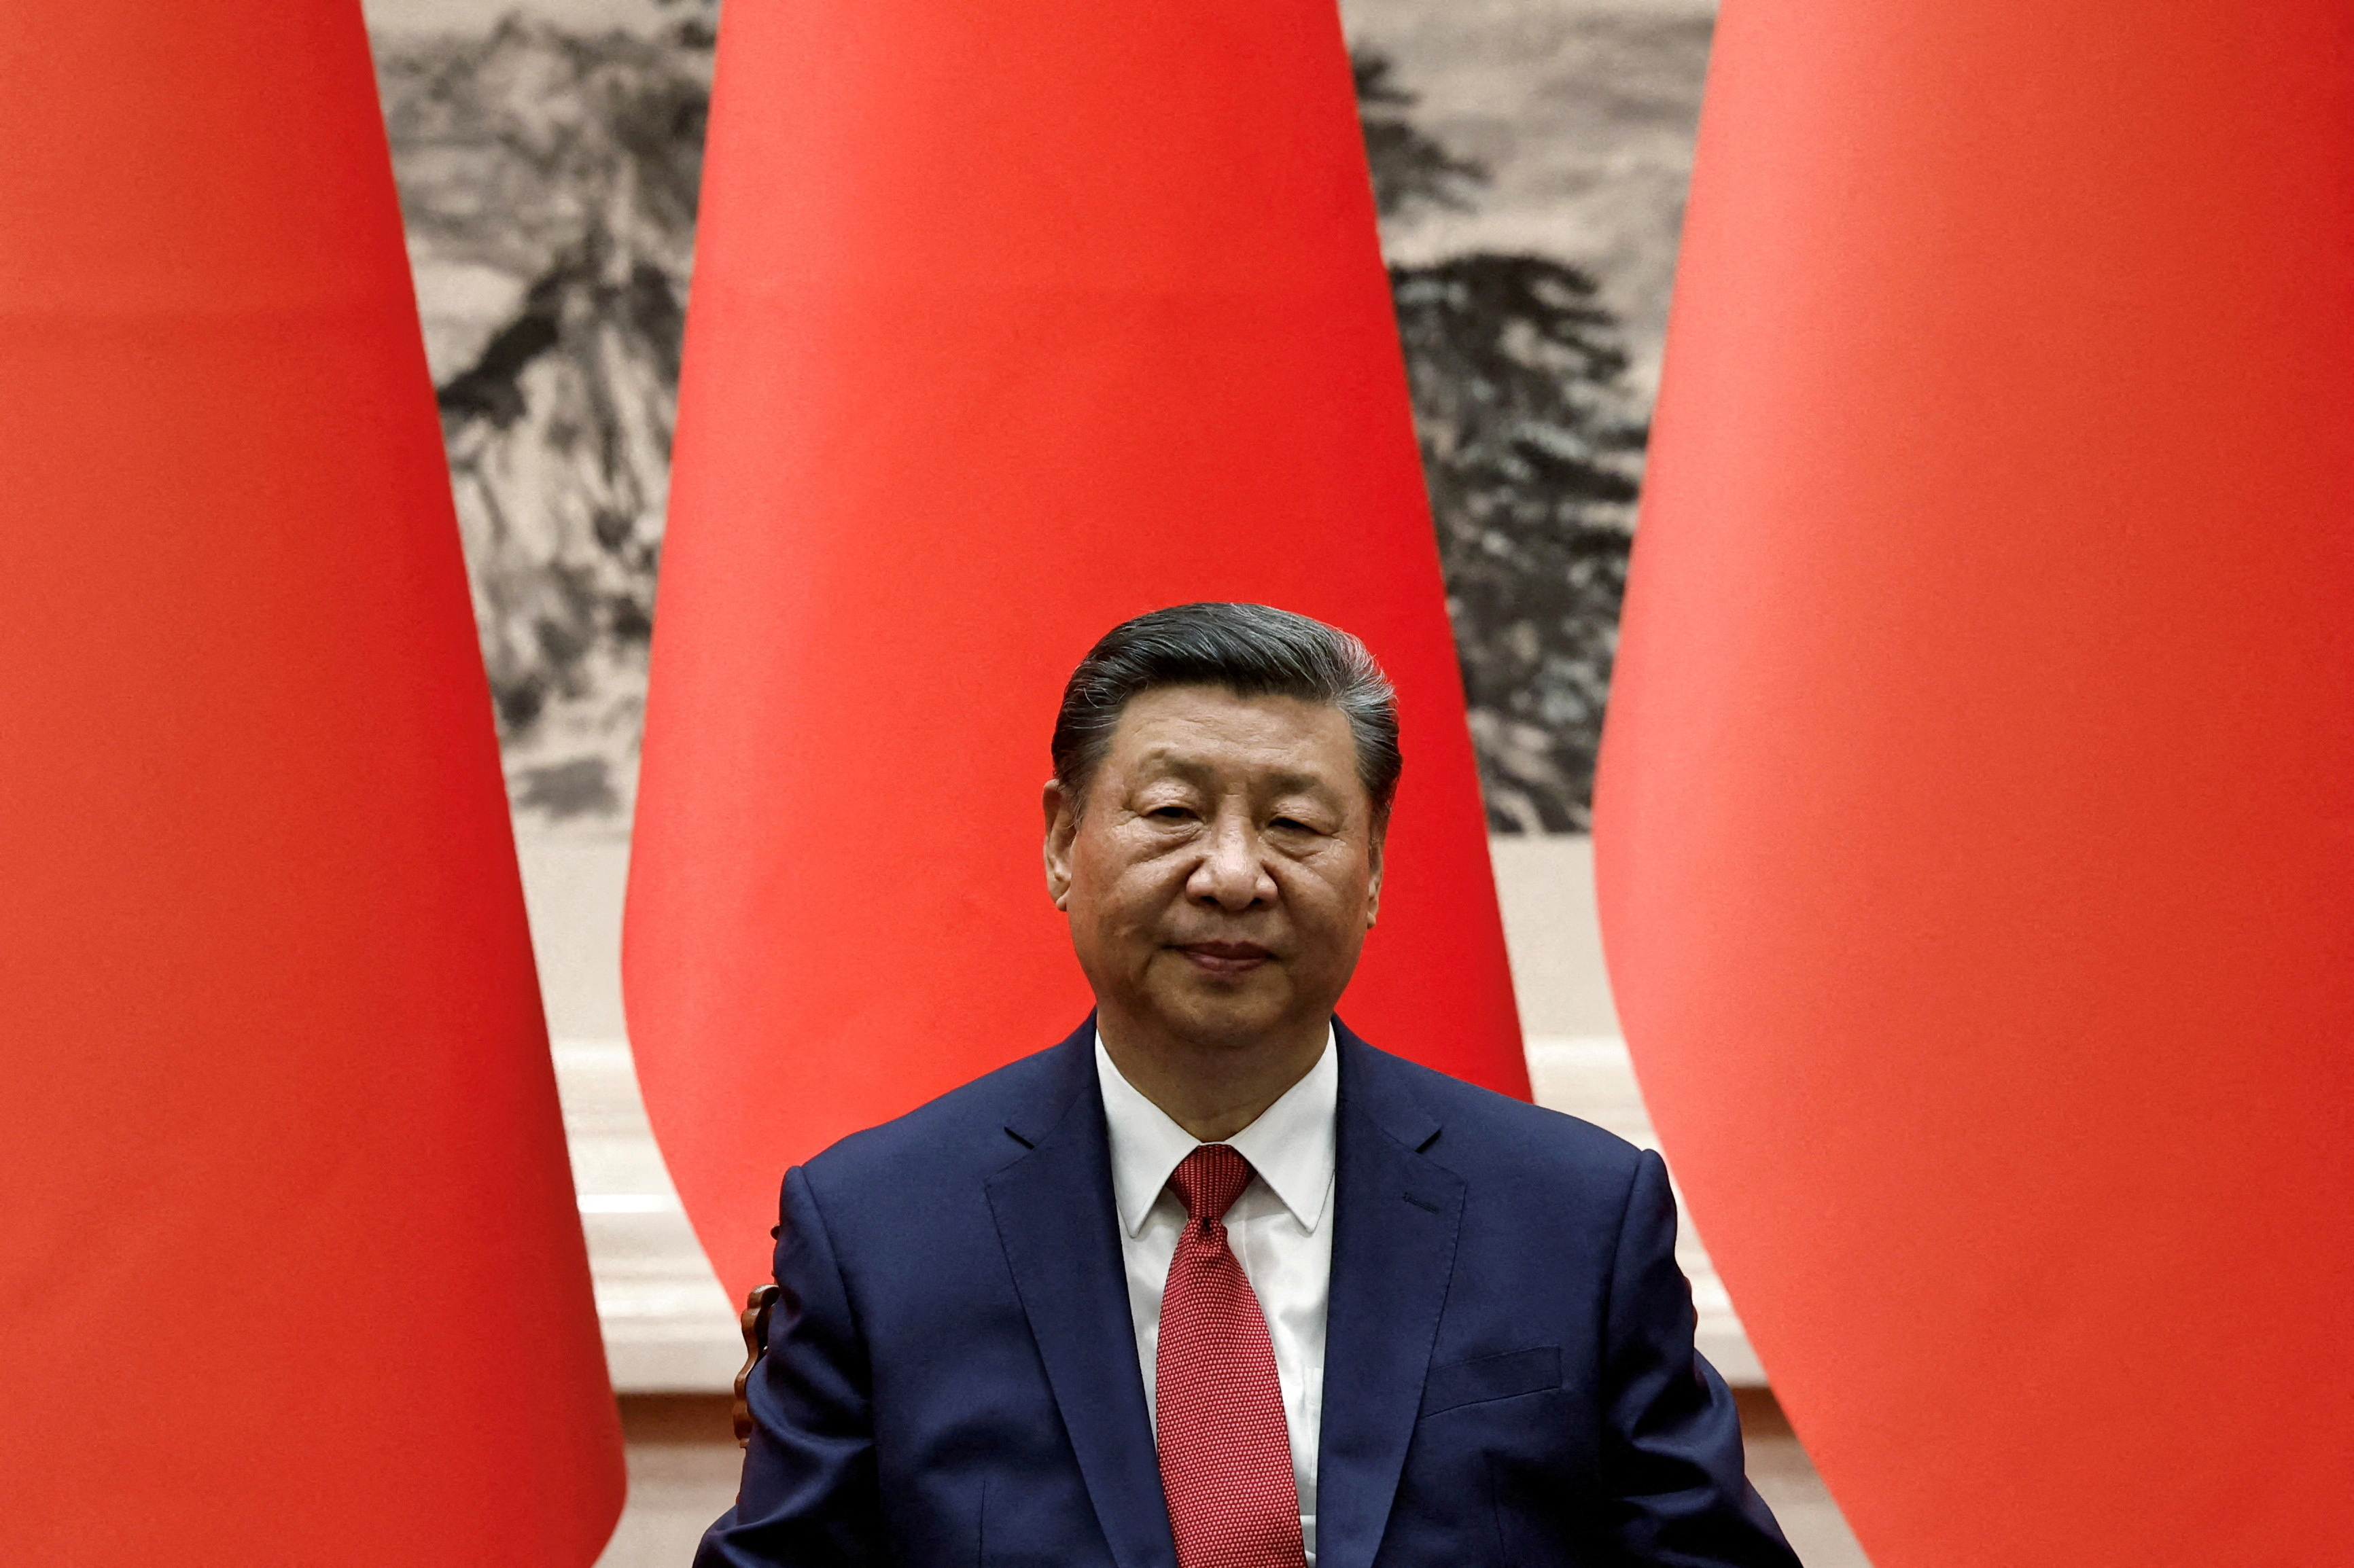 Chinese President Xi Jinping attends a signing ceremony in Beijing